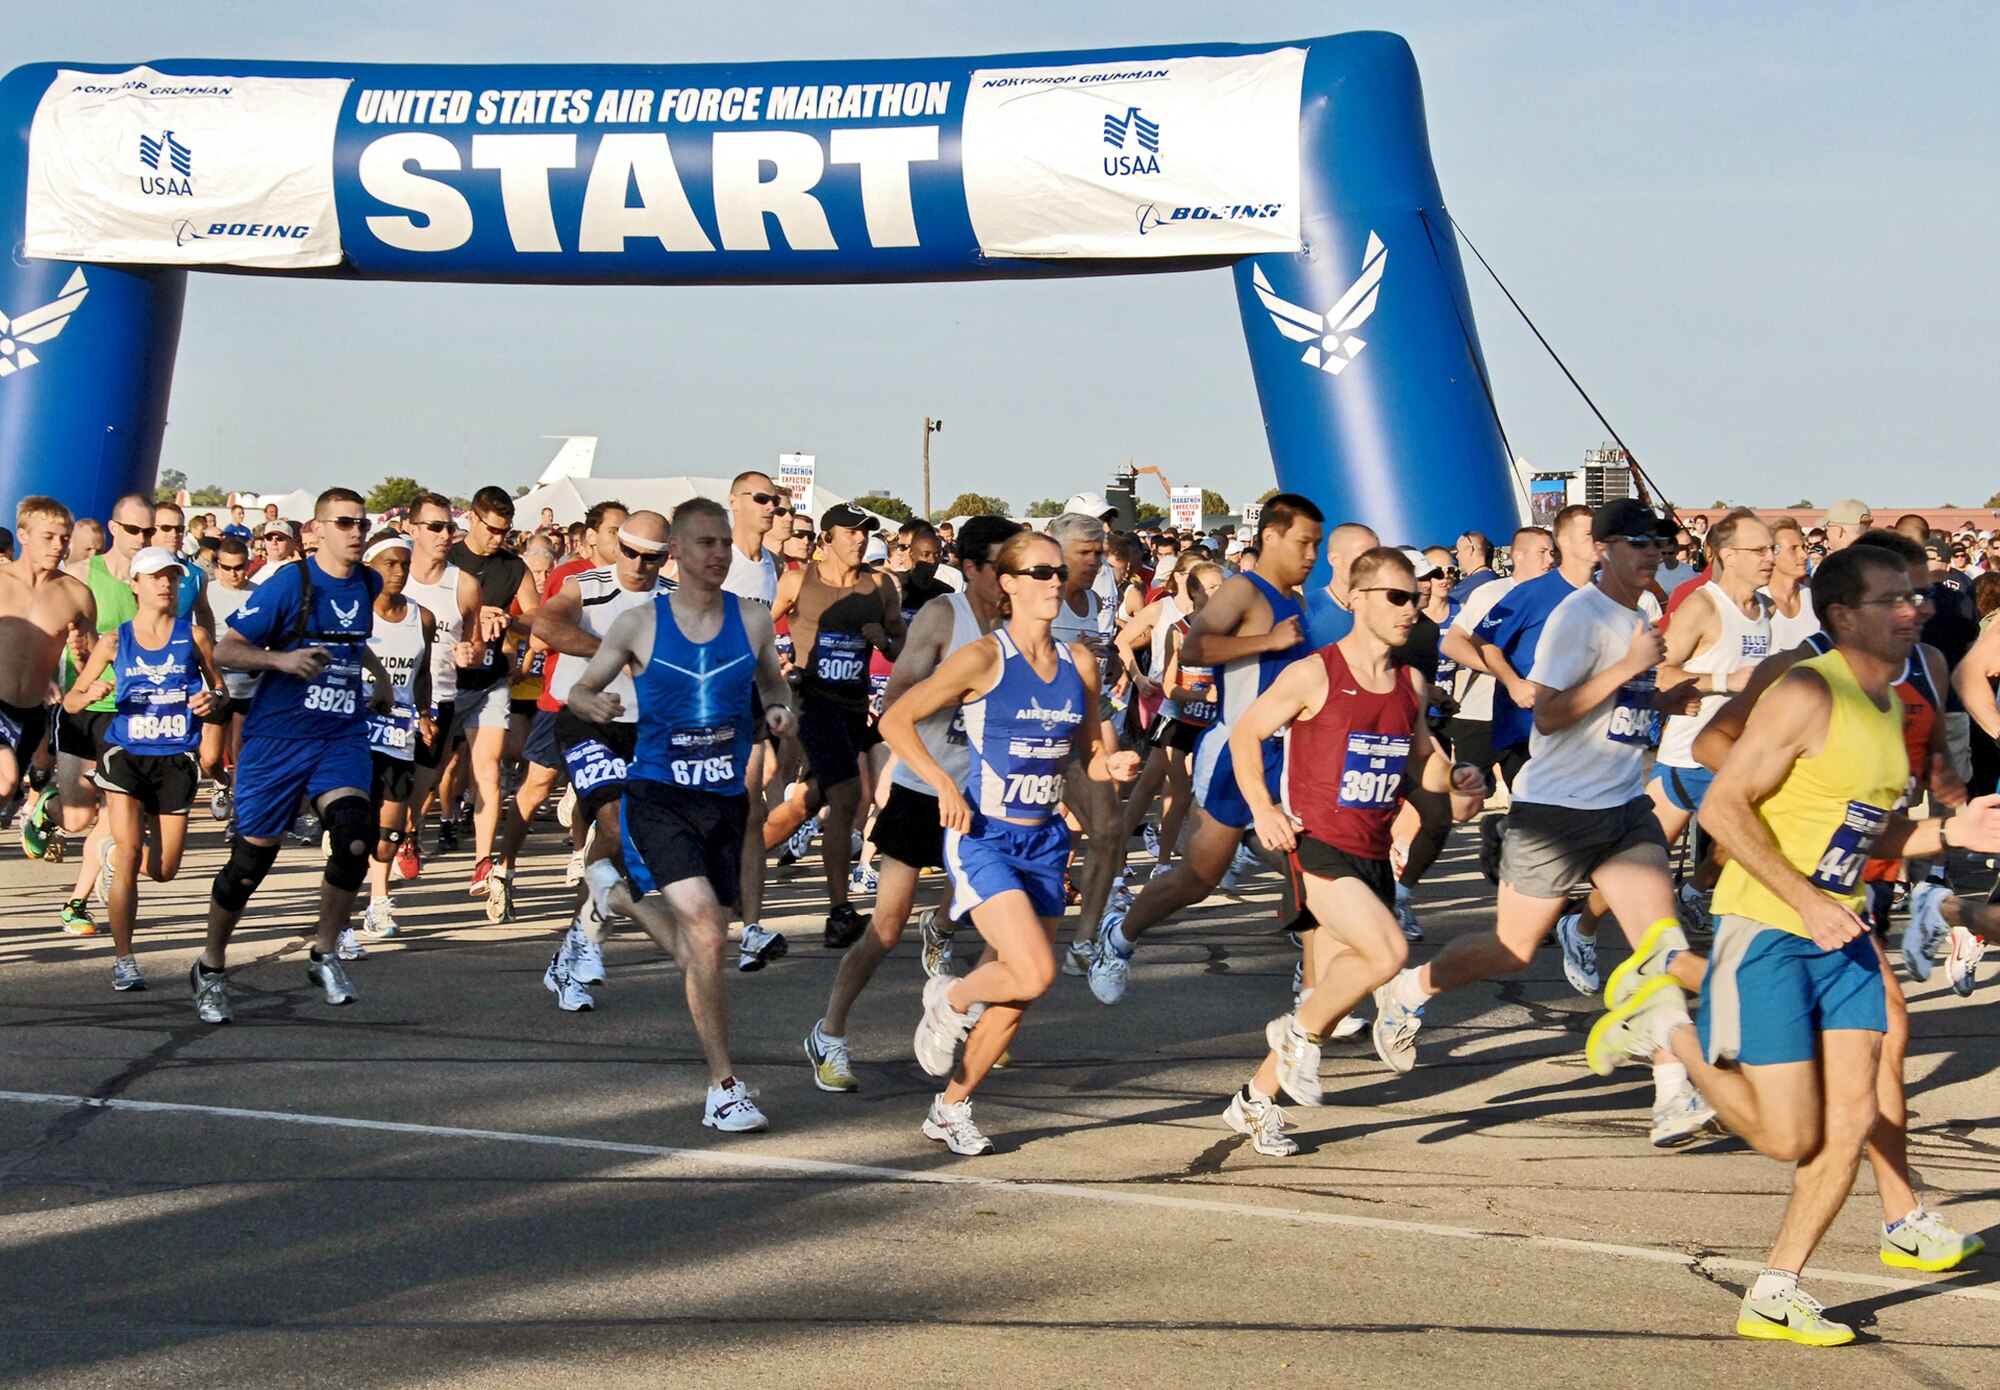 More than 3,800 runners start the half marathon last year at Wright-Patterson Air Force Base, Ohio. For the first time, the 2010 Air Force Marathon is maxed out for the full and half marathon. (U.S. Air Force photo/Ben Strasser)
